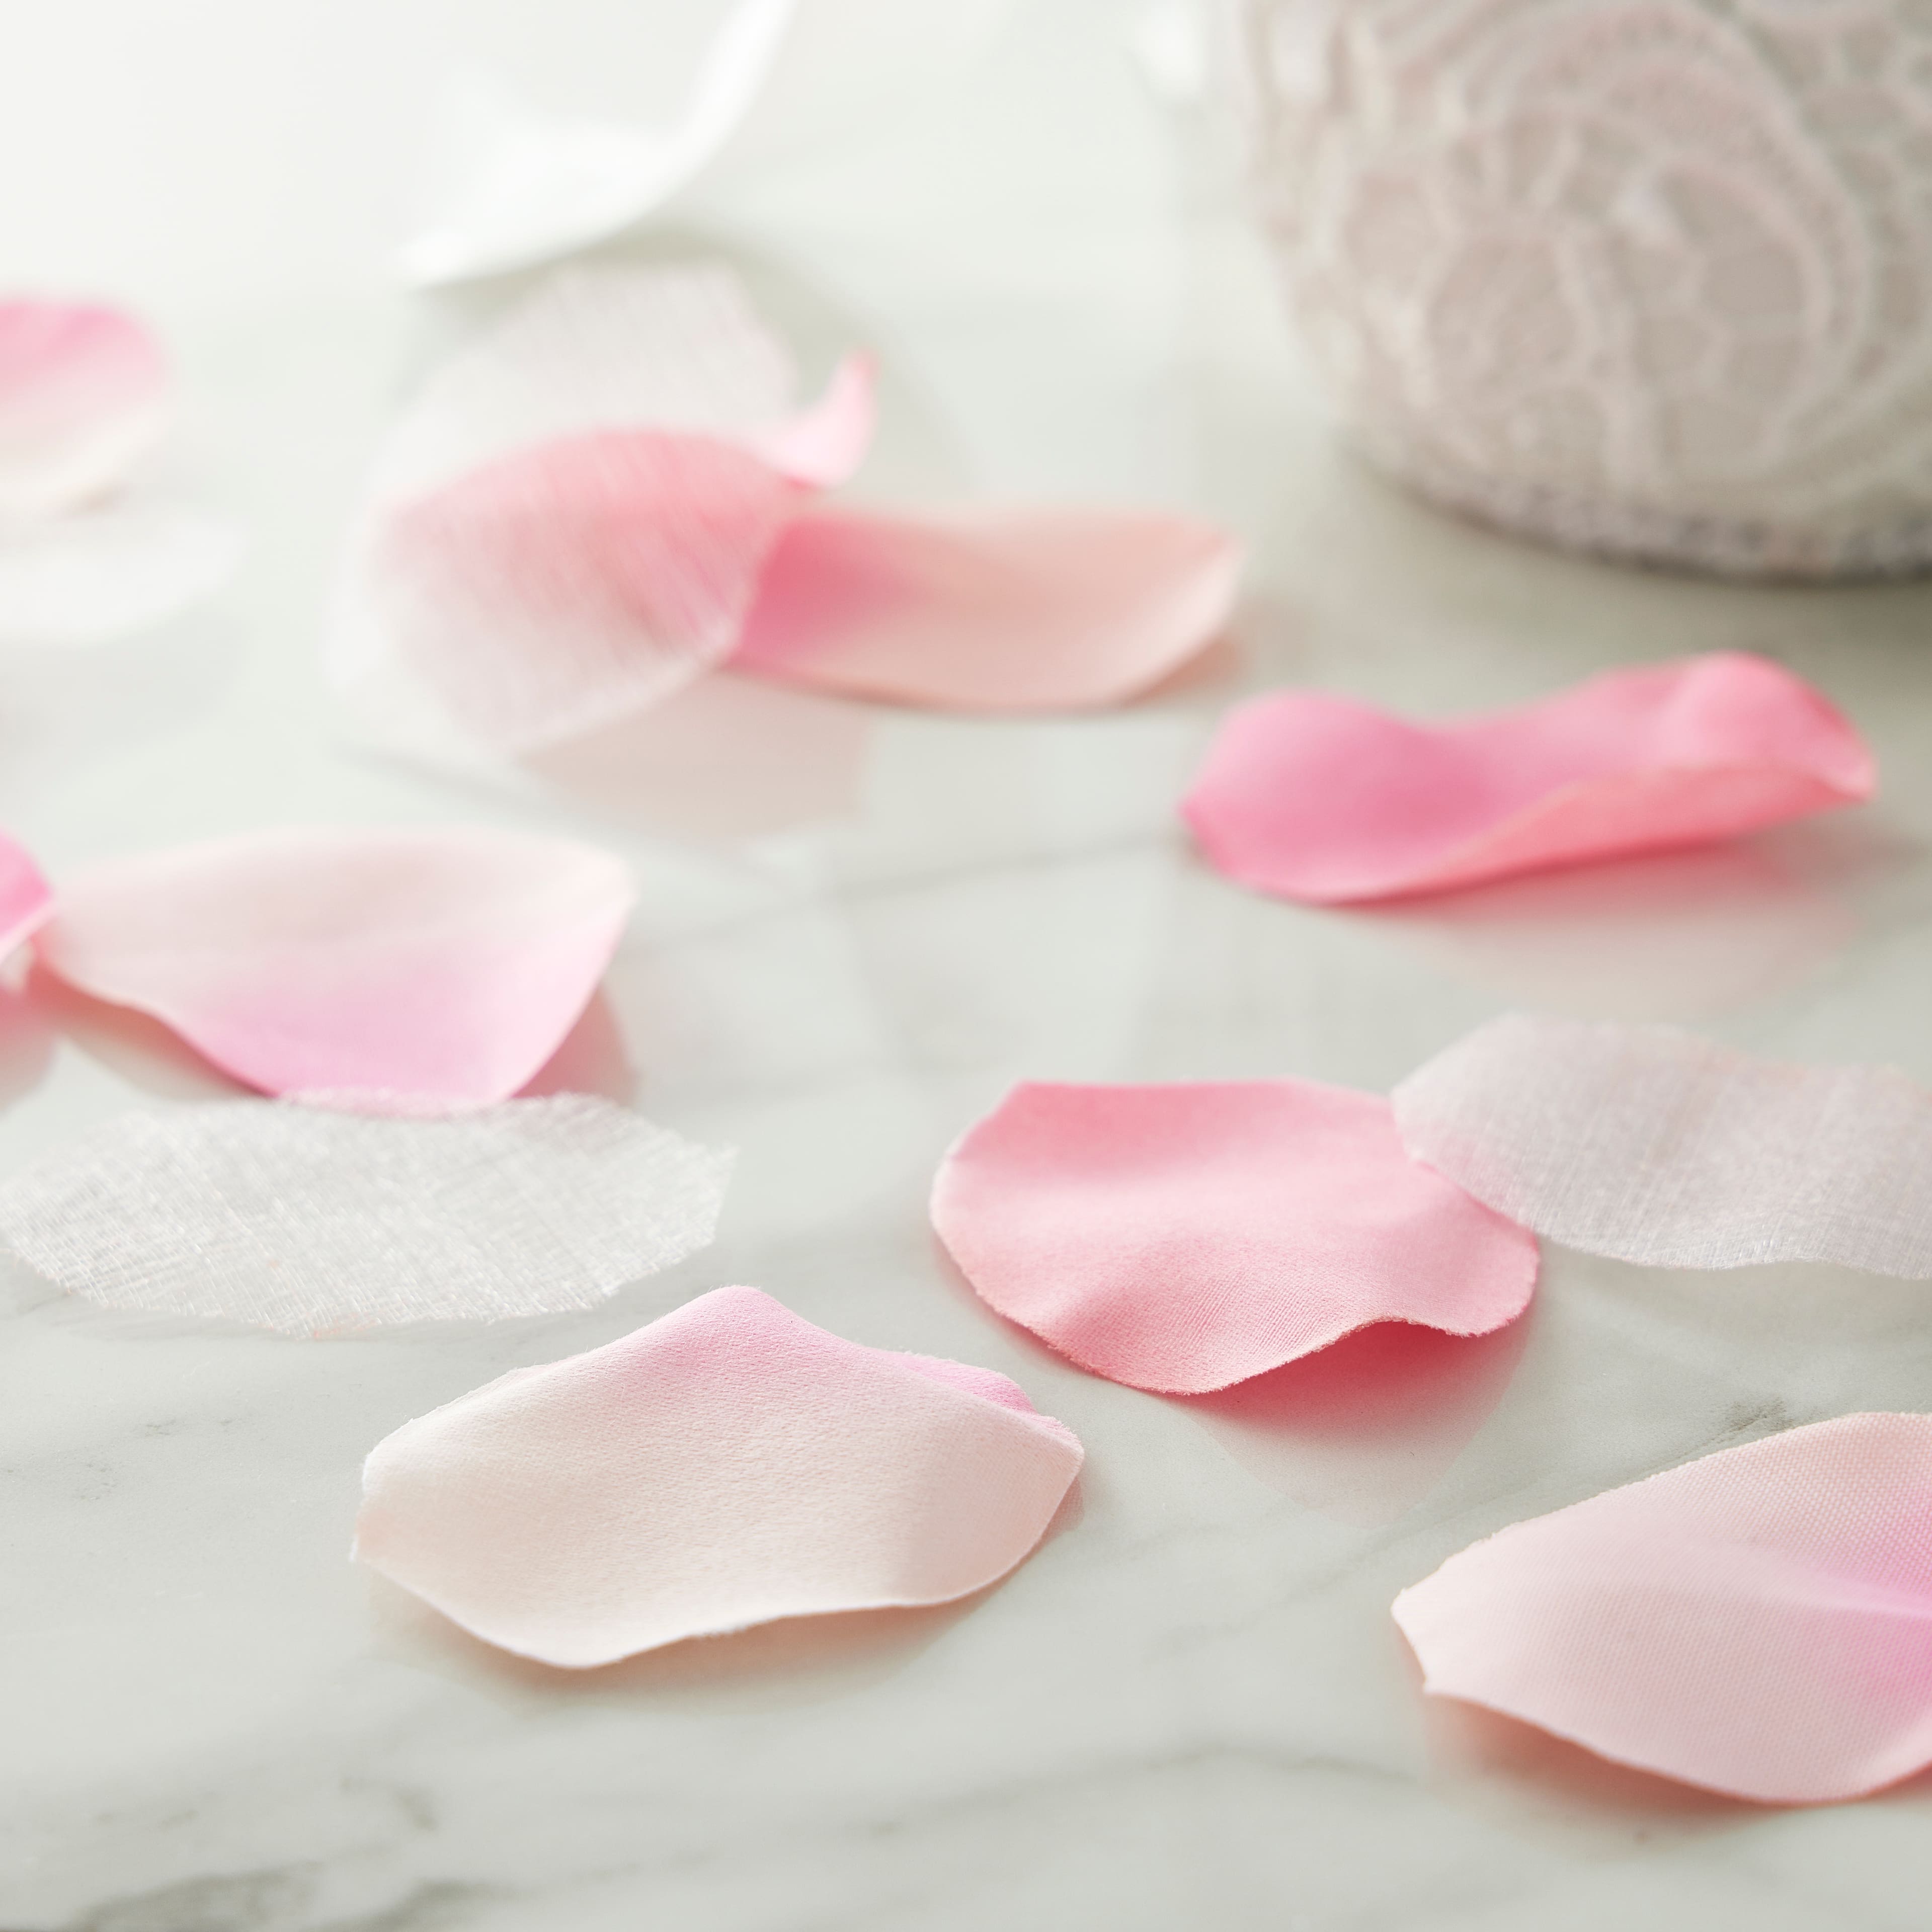 12 Pack: Occasions Pink Decorative Rose Petals by Celebrate It™ - image 2 of 3